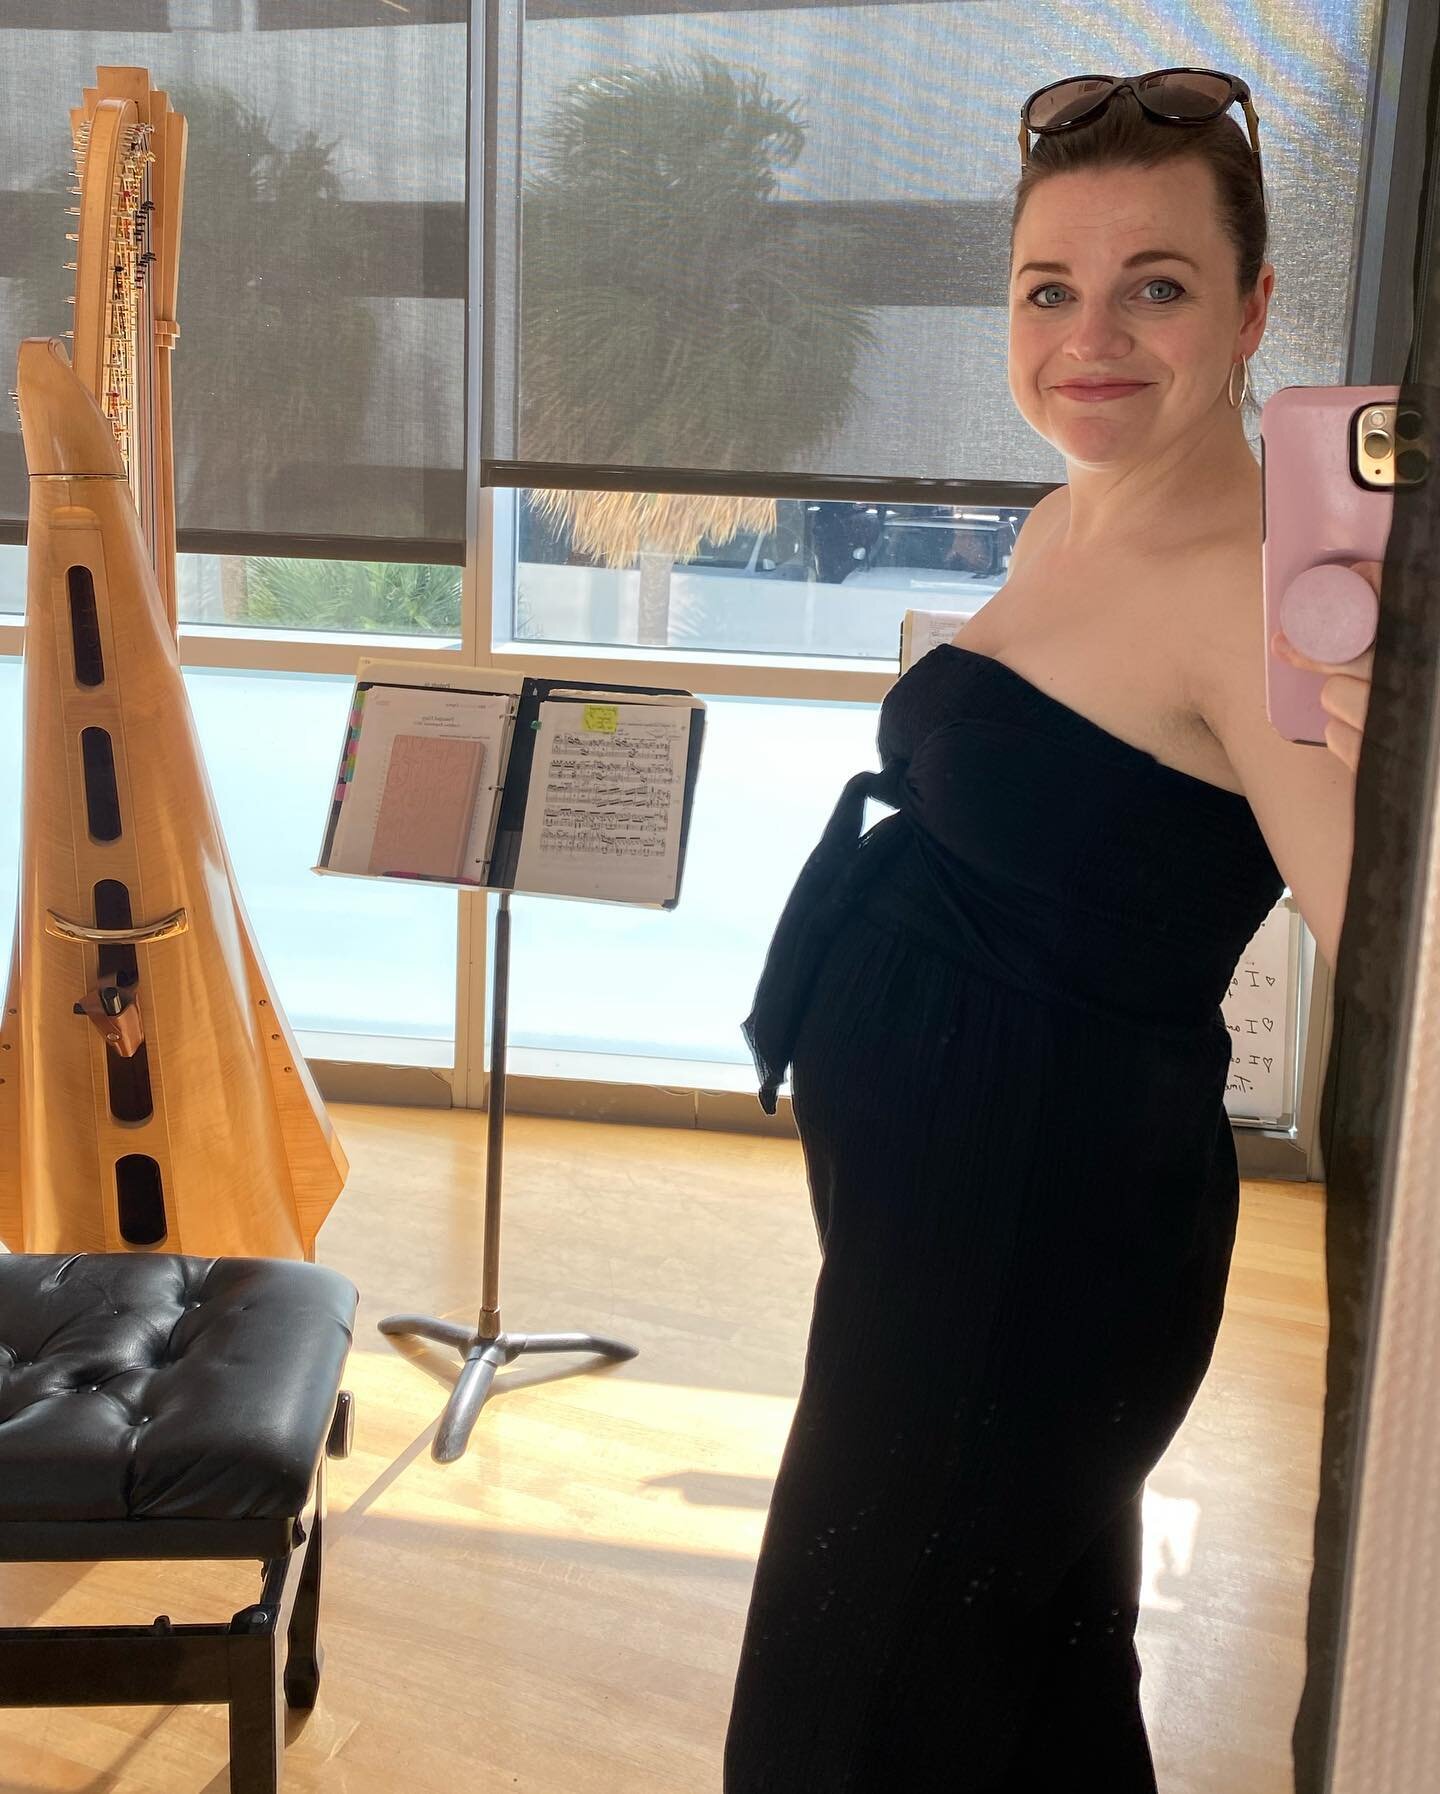 I had such a blast bumpin' in South Beach, making beautiful music, and seeing people I love! ❤️🏝️🎶 (learn more in my monthly newsletter - link in bio!)

Playing here with the @nwsymphony and learning from @mtilsonthomas for three years after school